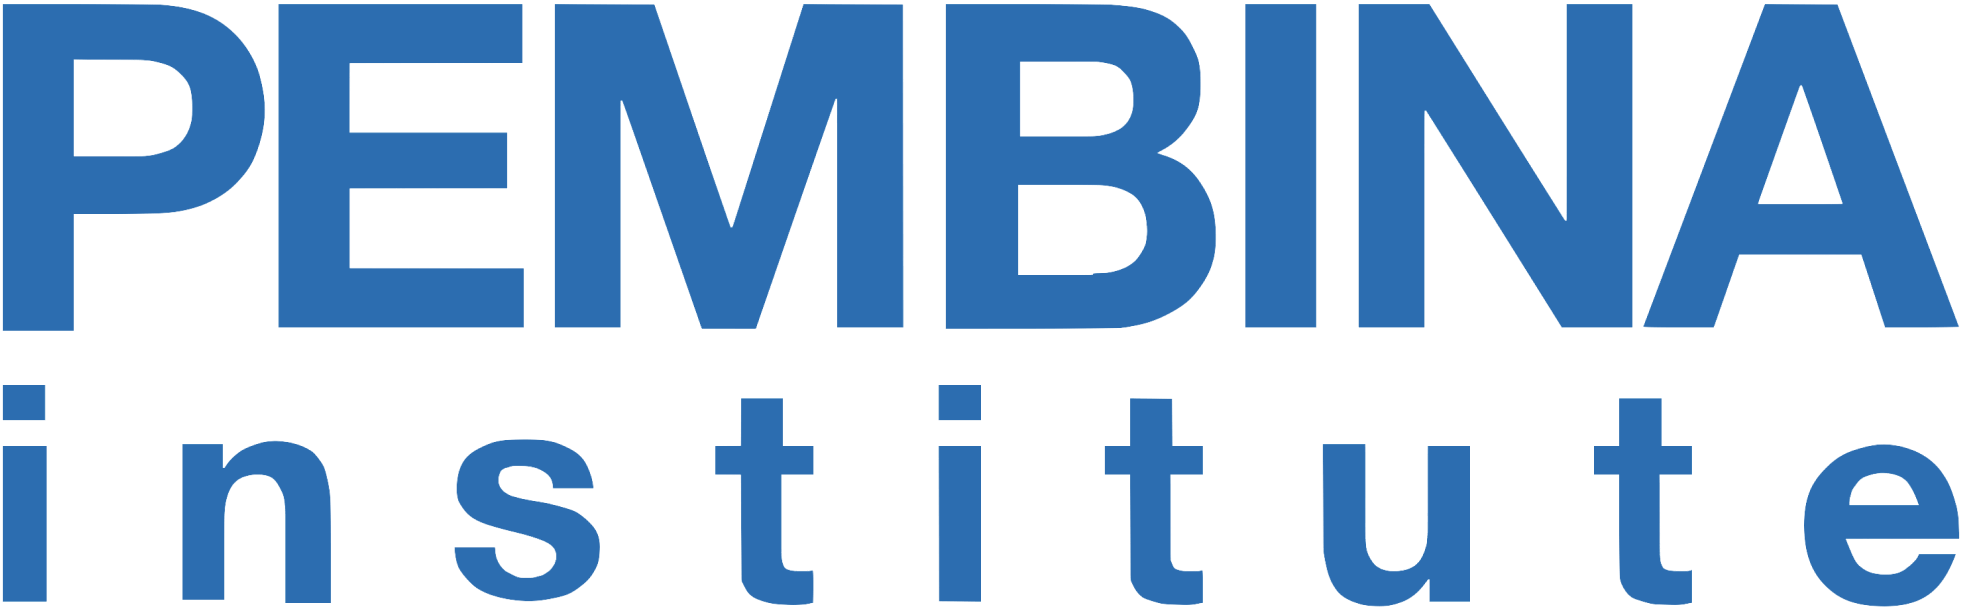 Logo for Pembina Institute on a transparent background